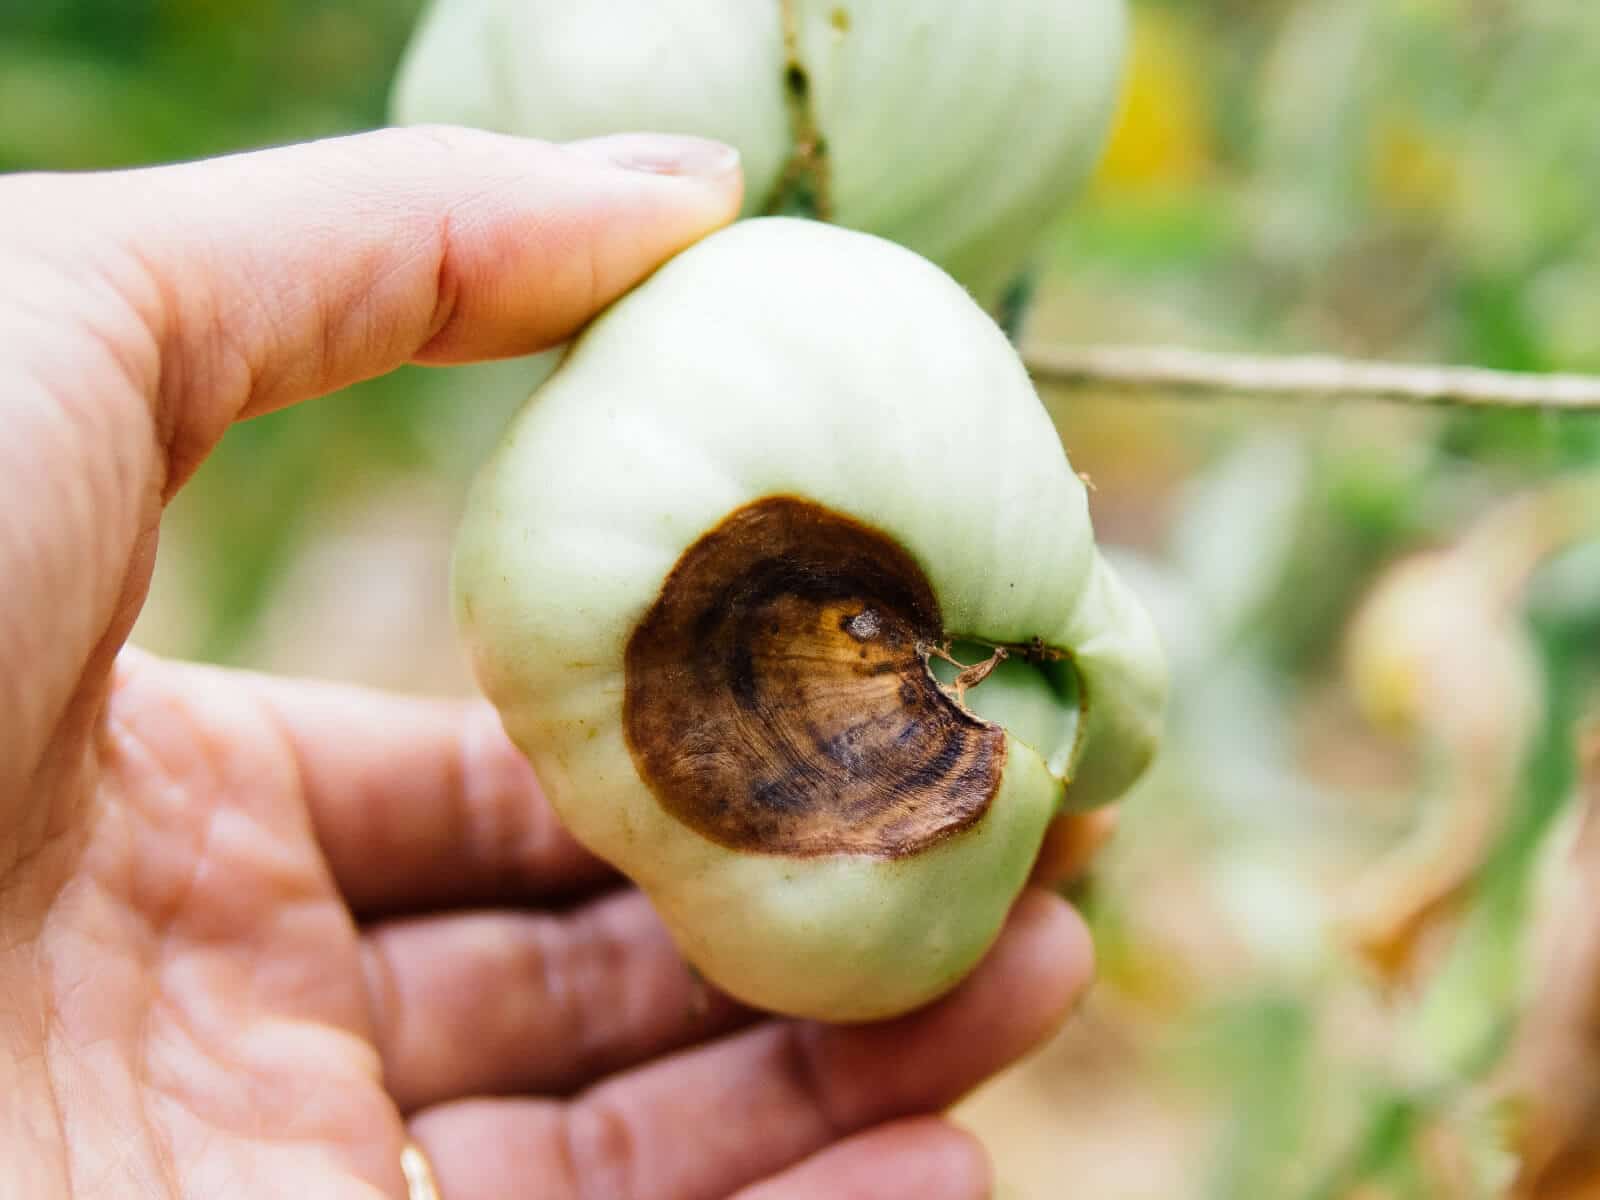 A green tomato damaged by blossom end rot